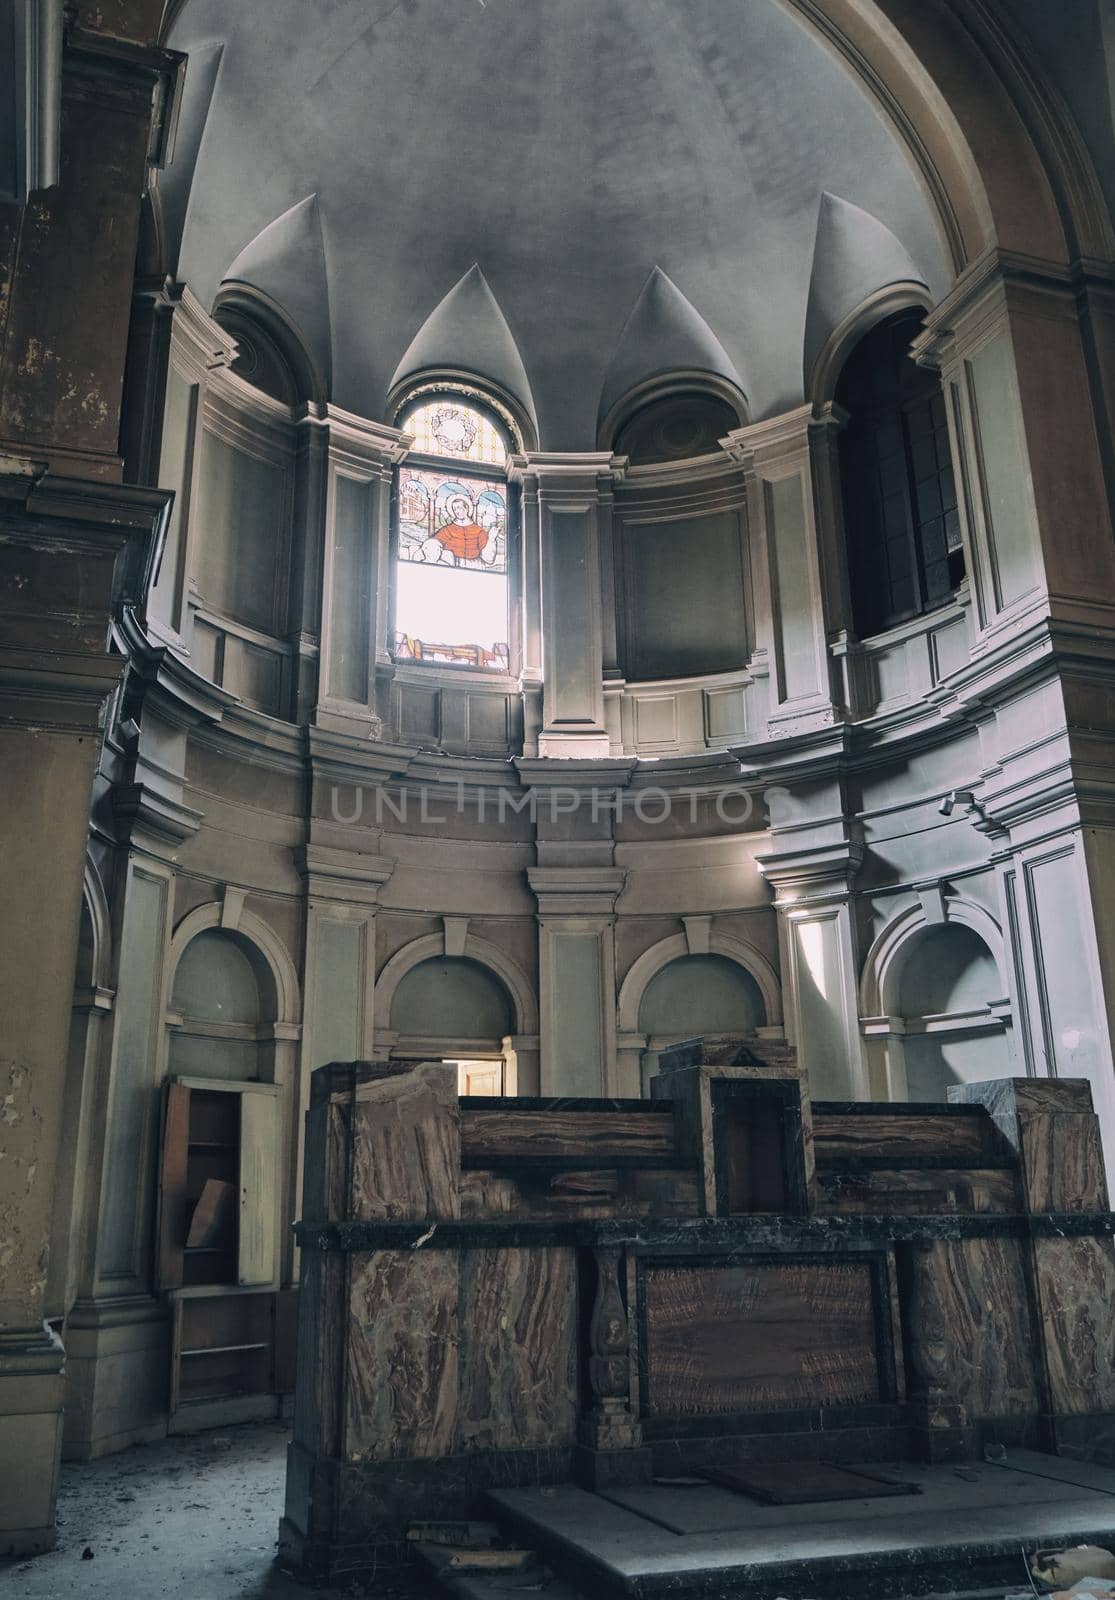 abandoned church. Interior architecture of old building by Sandronize